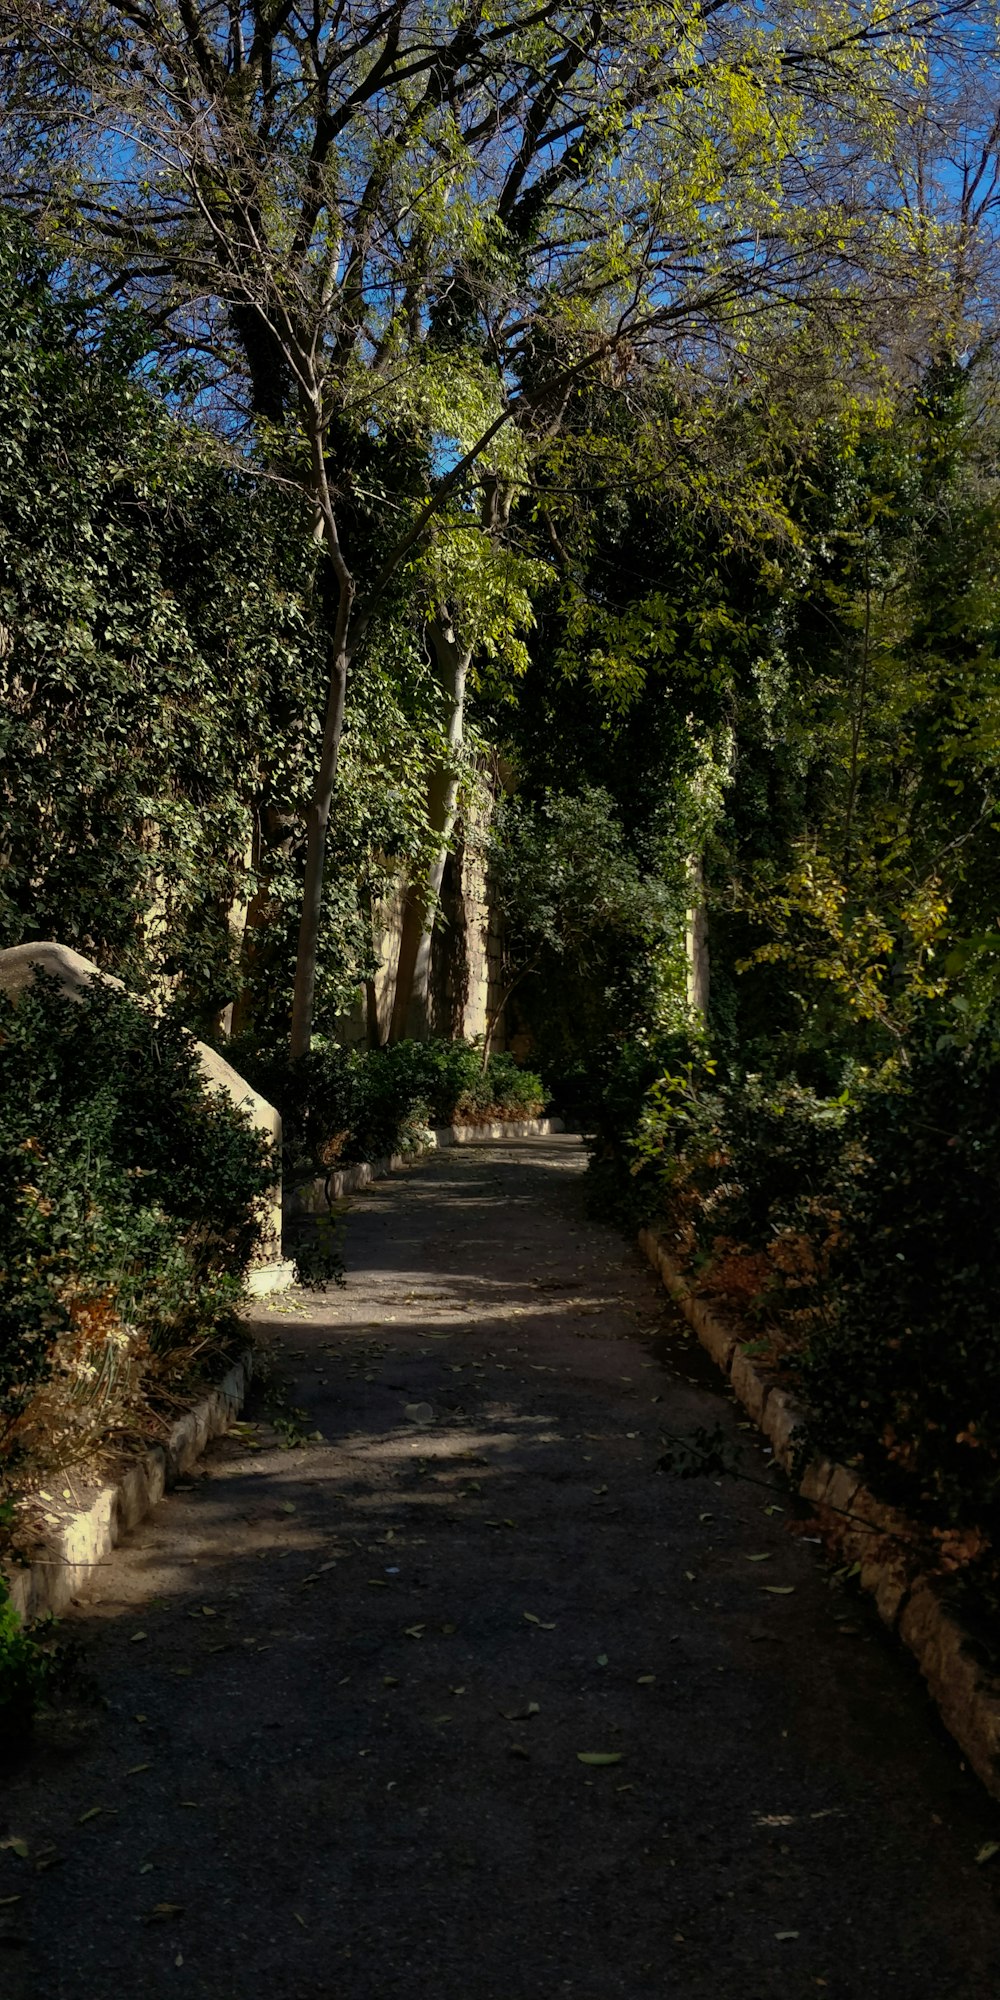 a path in a park lined with trees